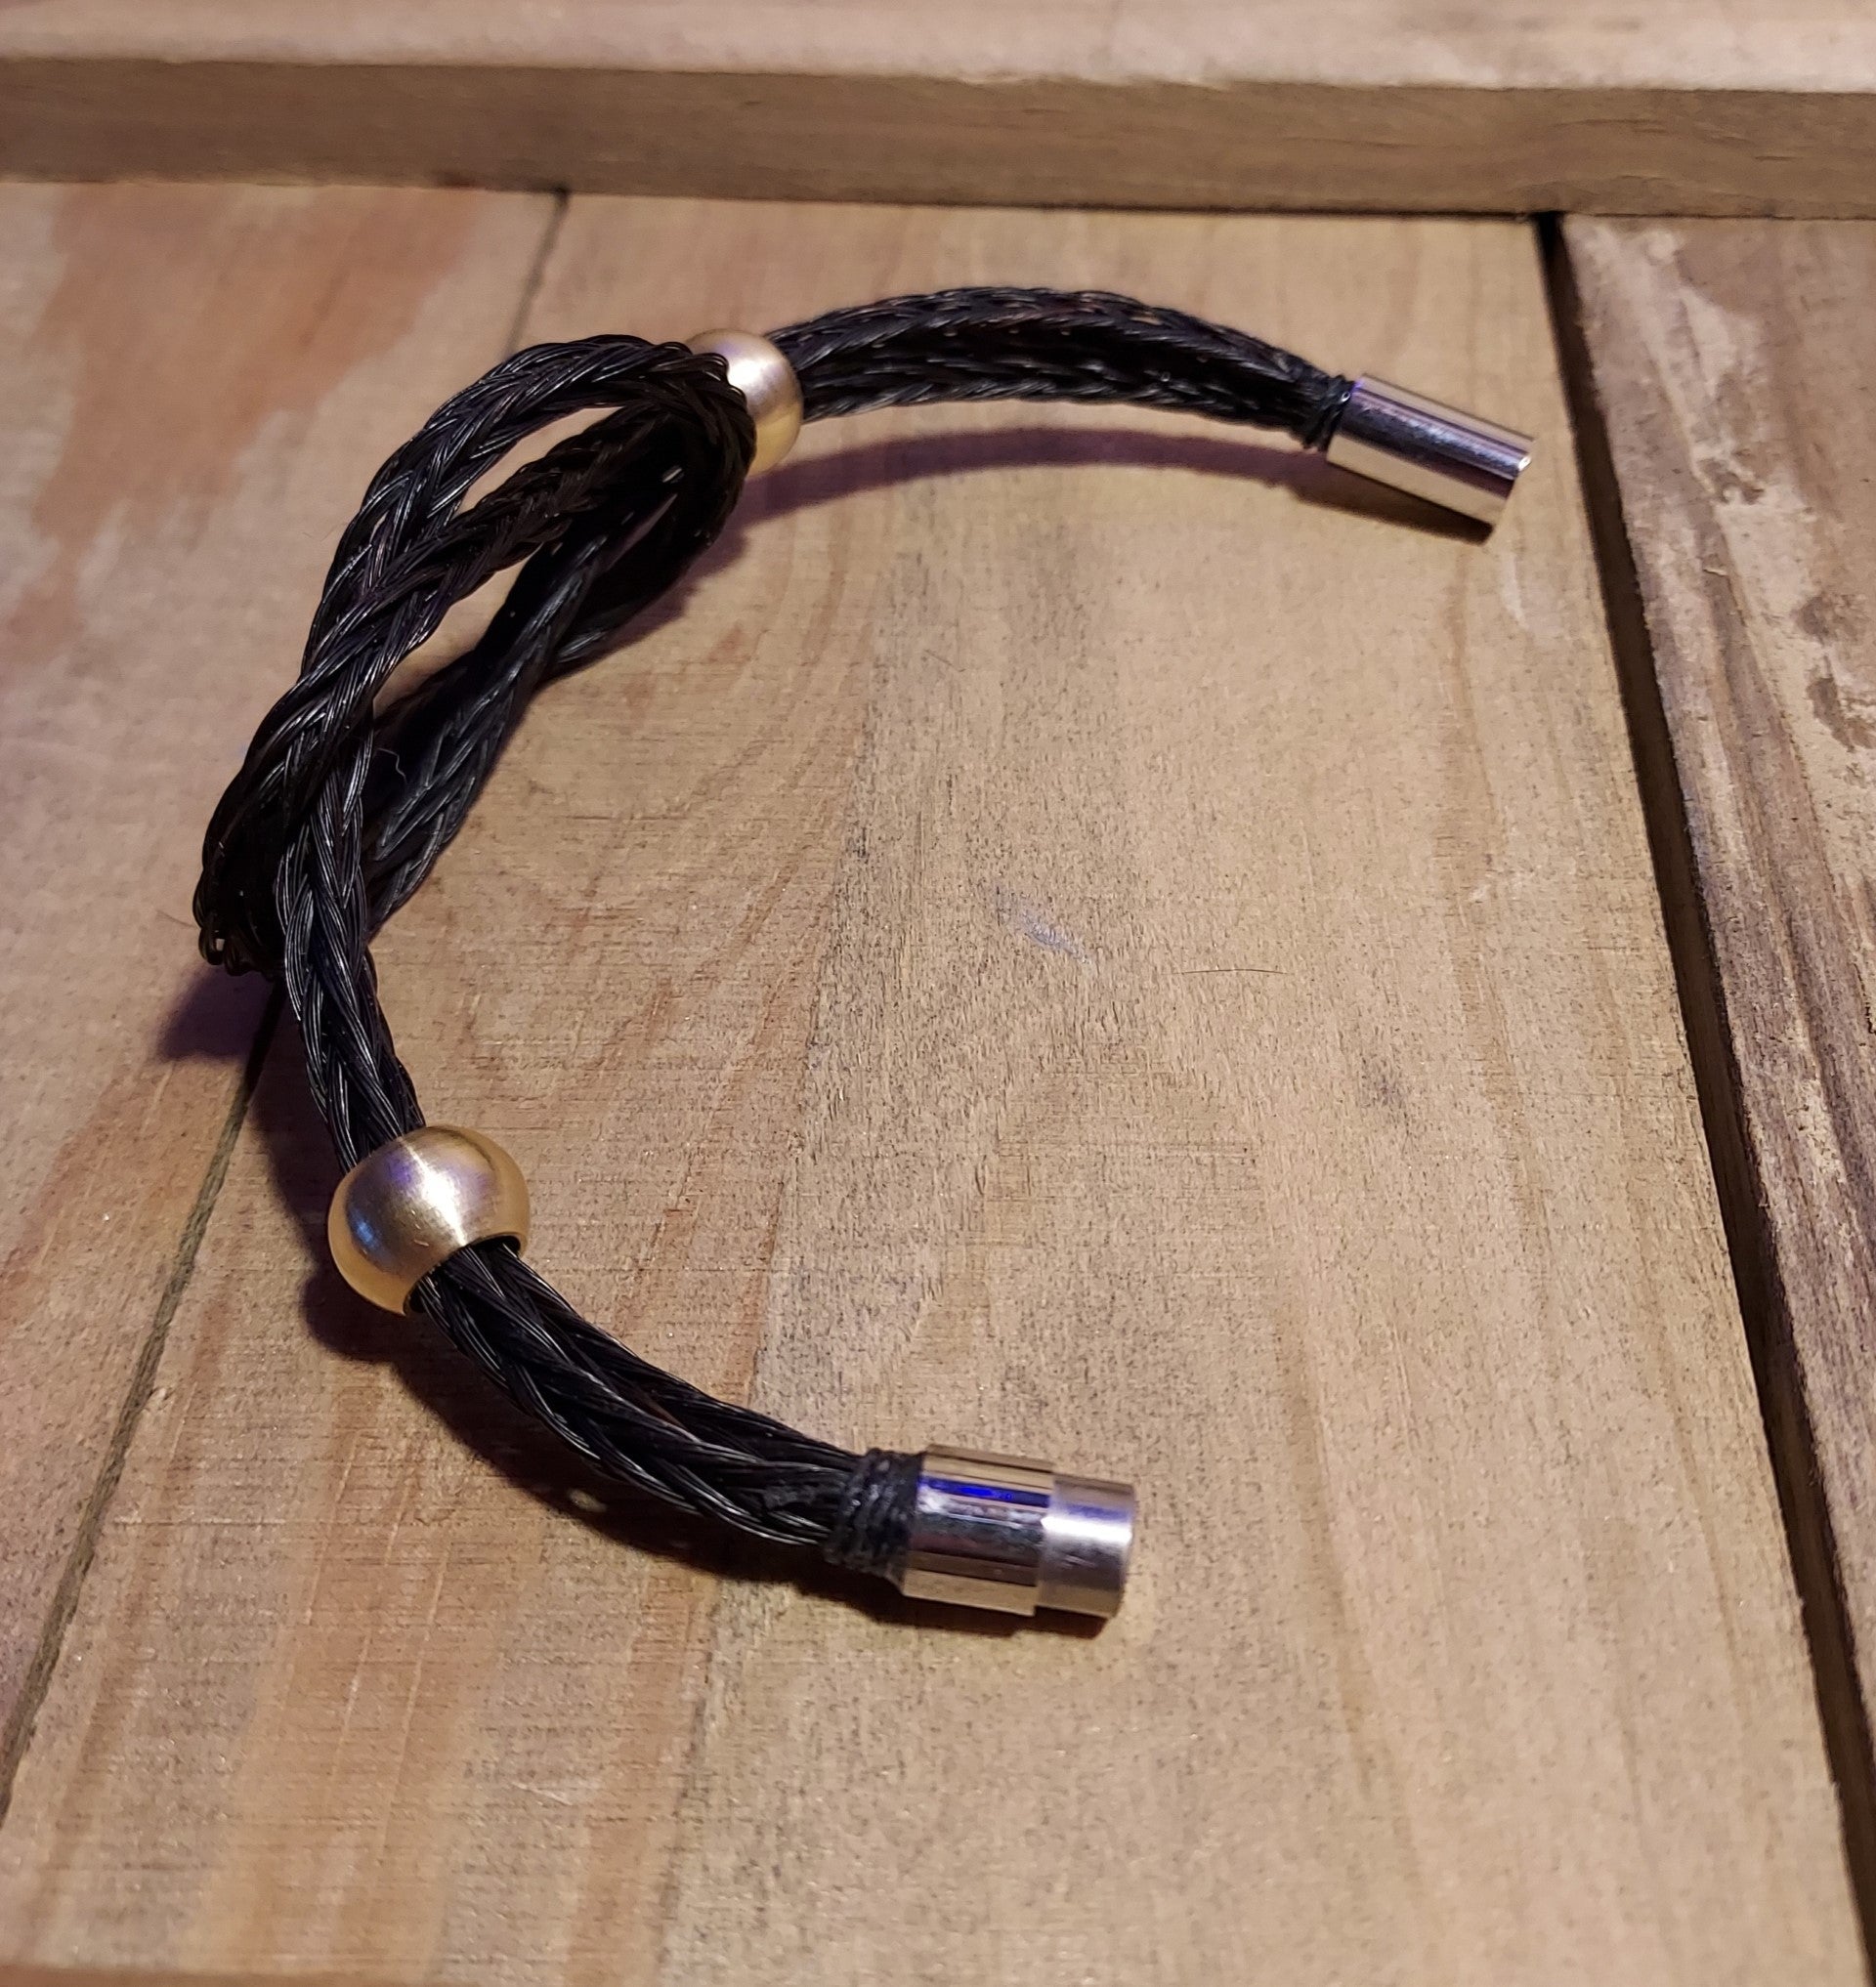 magnetic clasps used to secure the braided black horsehair bracelet